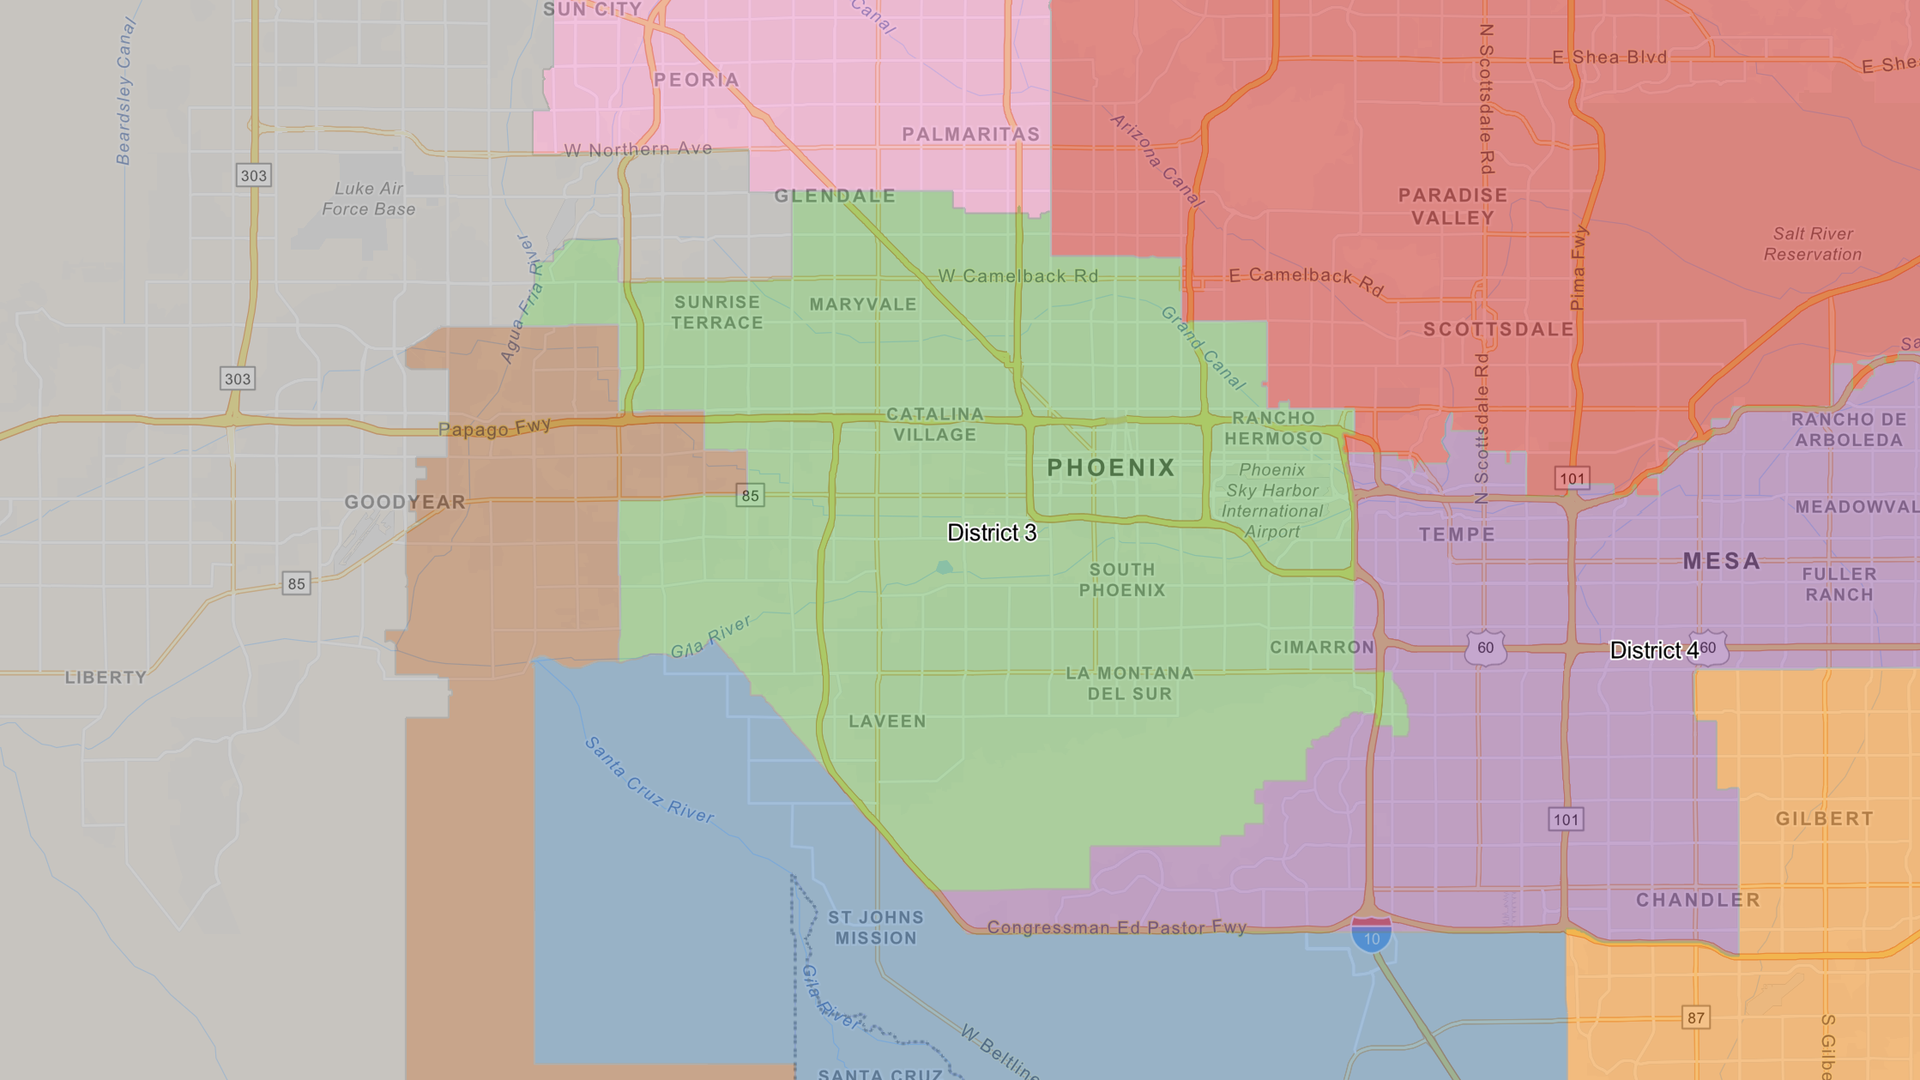 The outline of a congressional district shaded in green over a map of Phoenix.